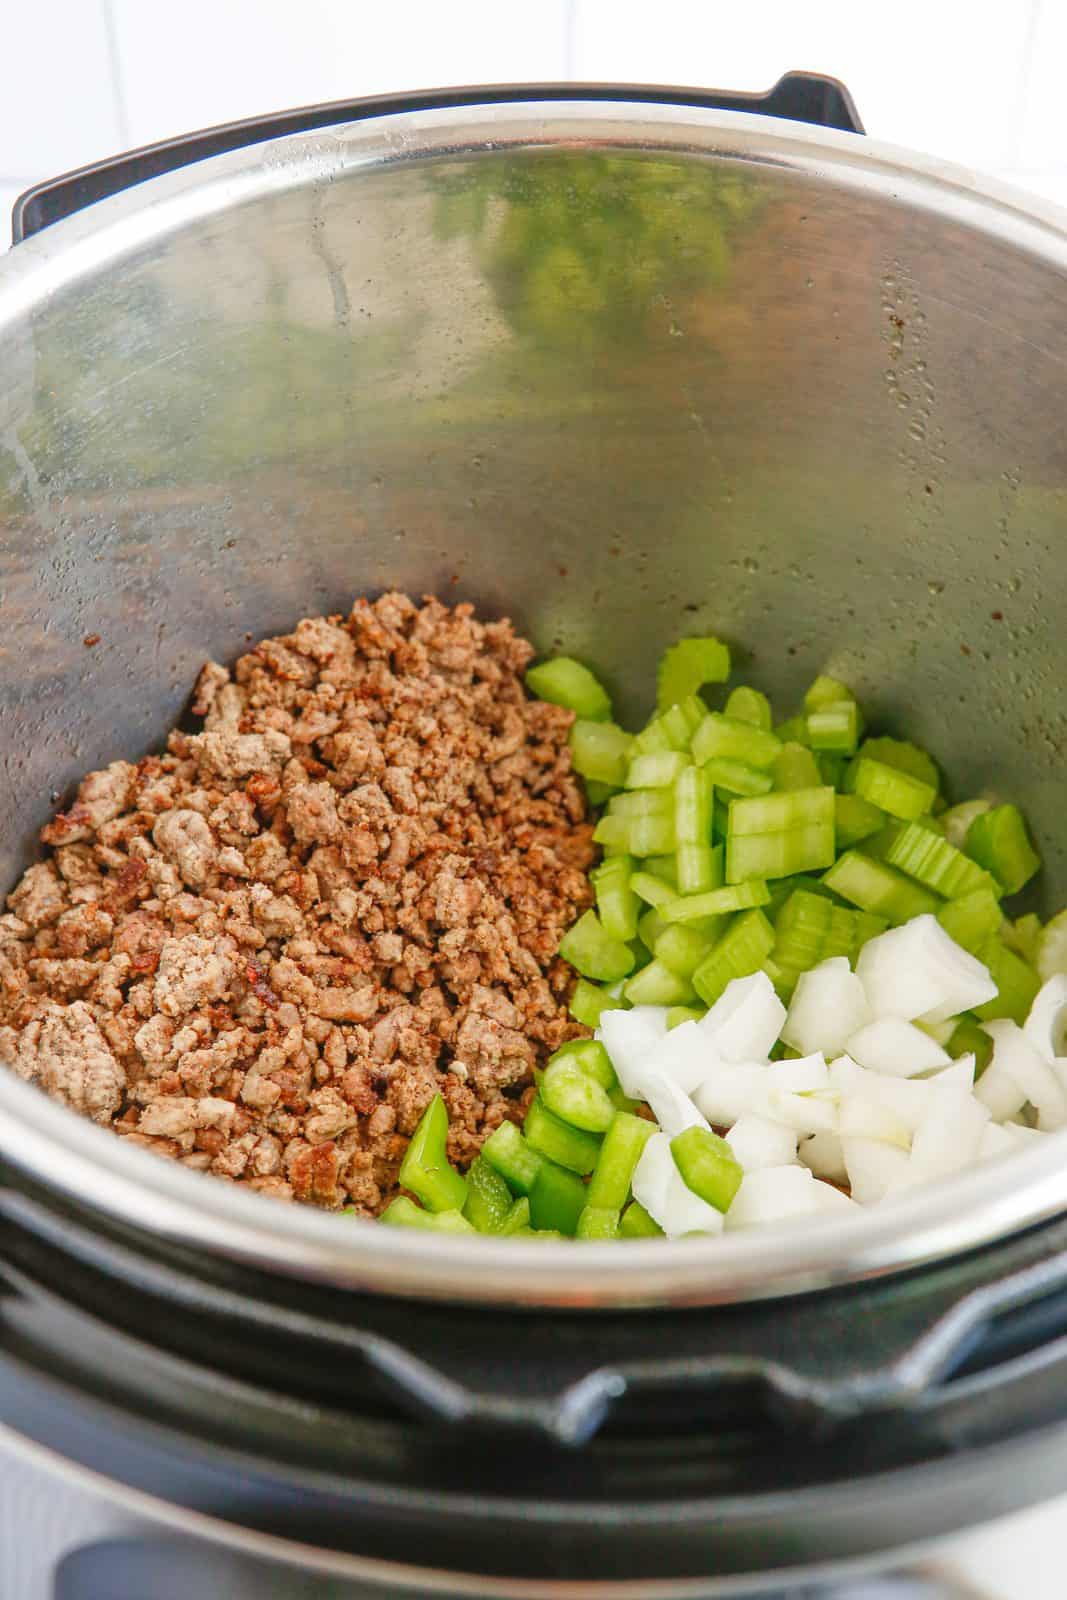 Vegetables added to ground beef in instant pot.